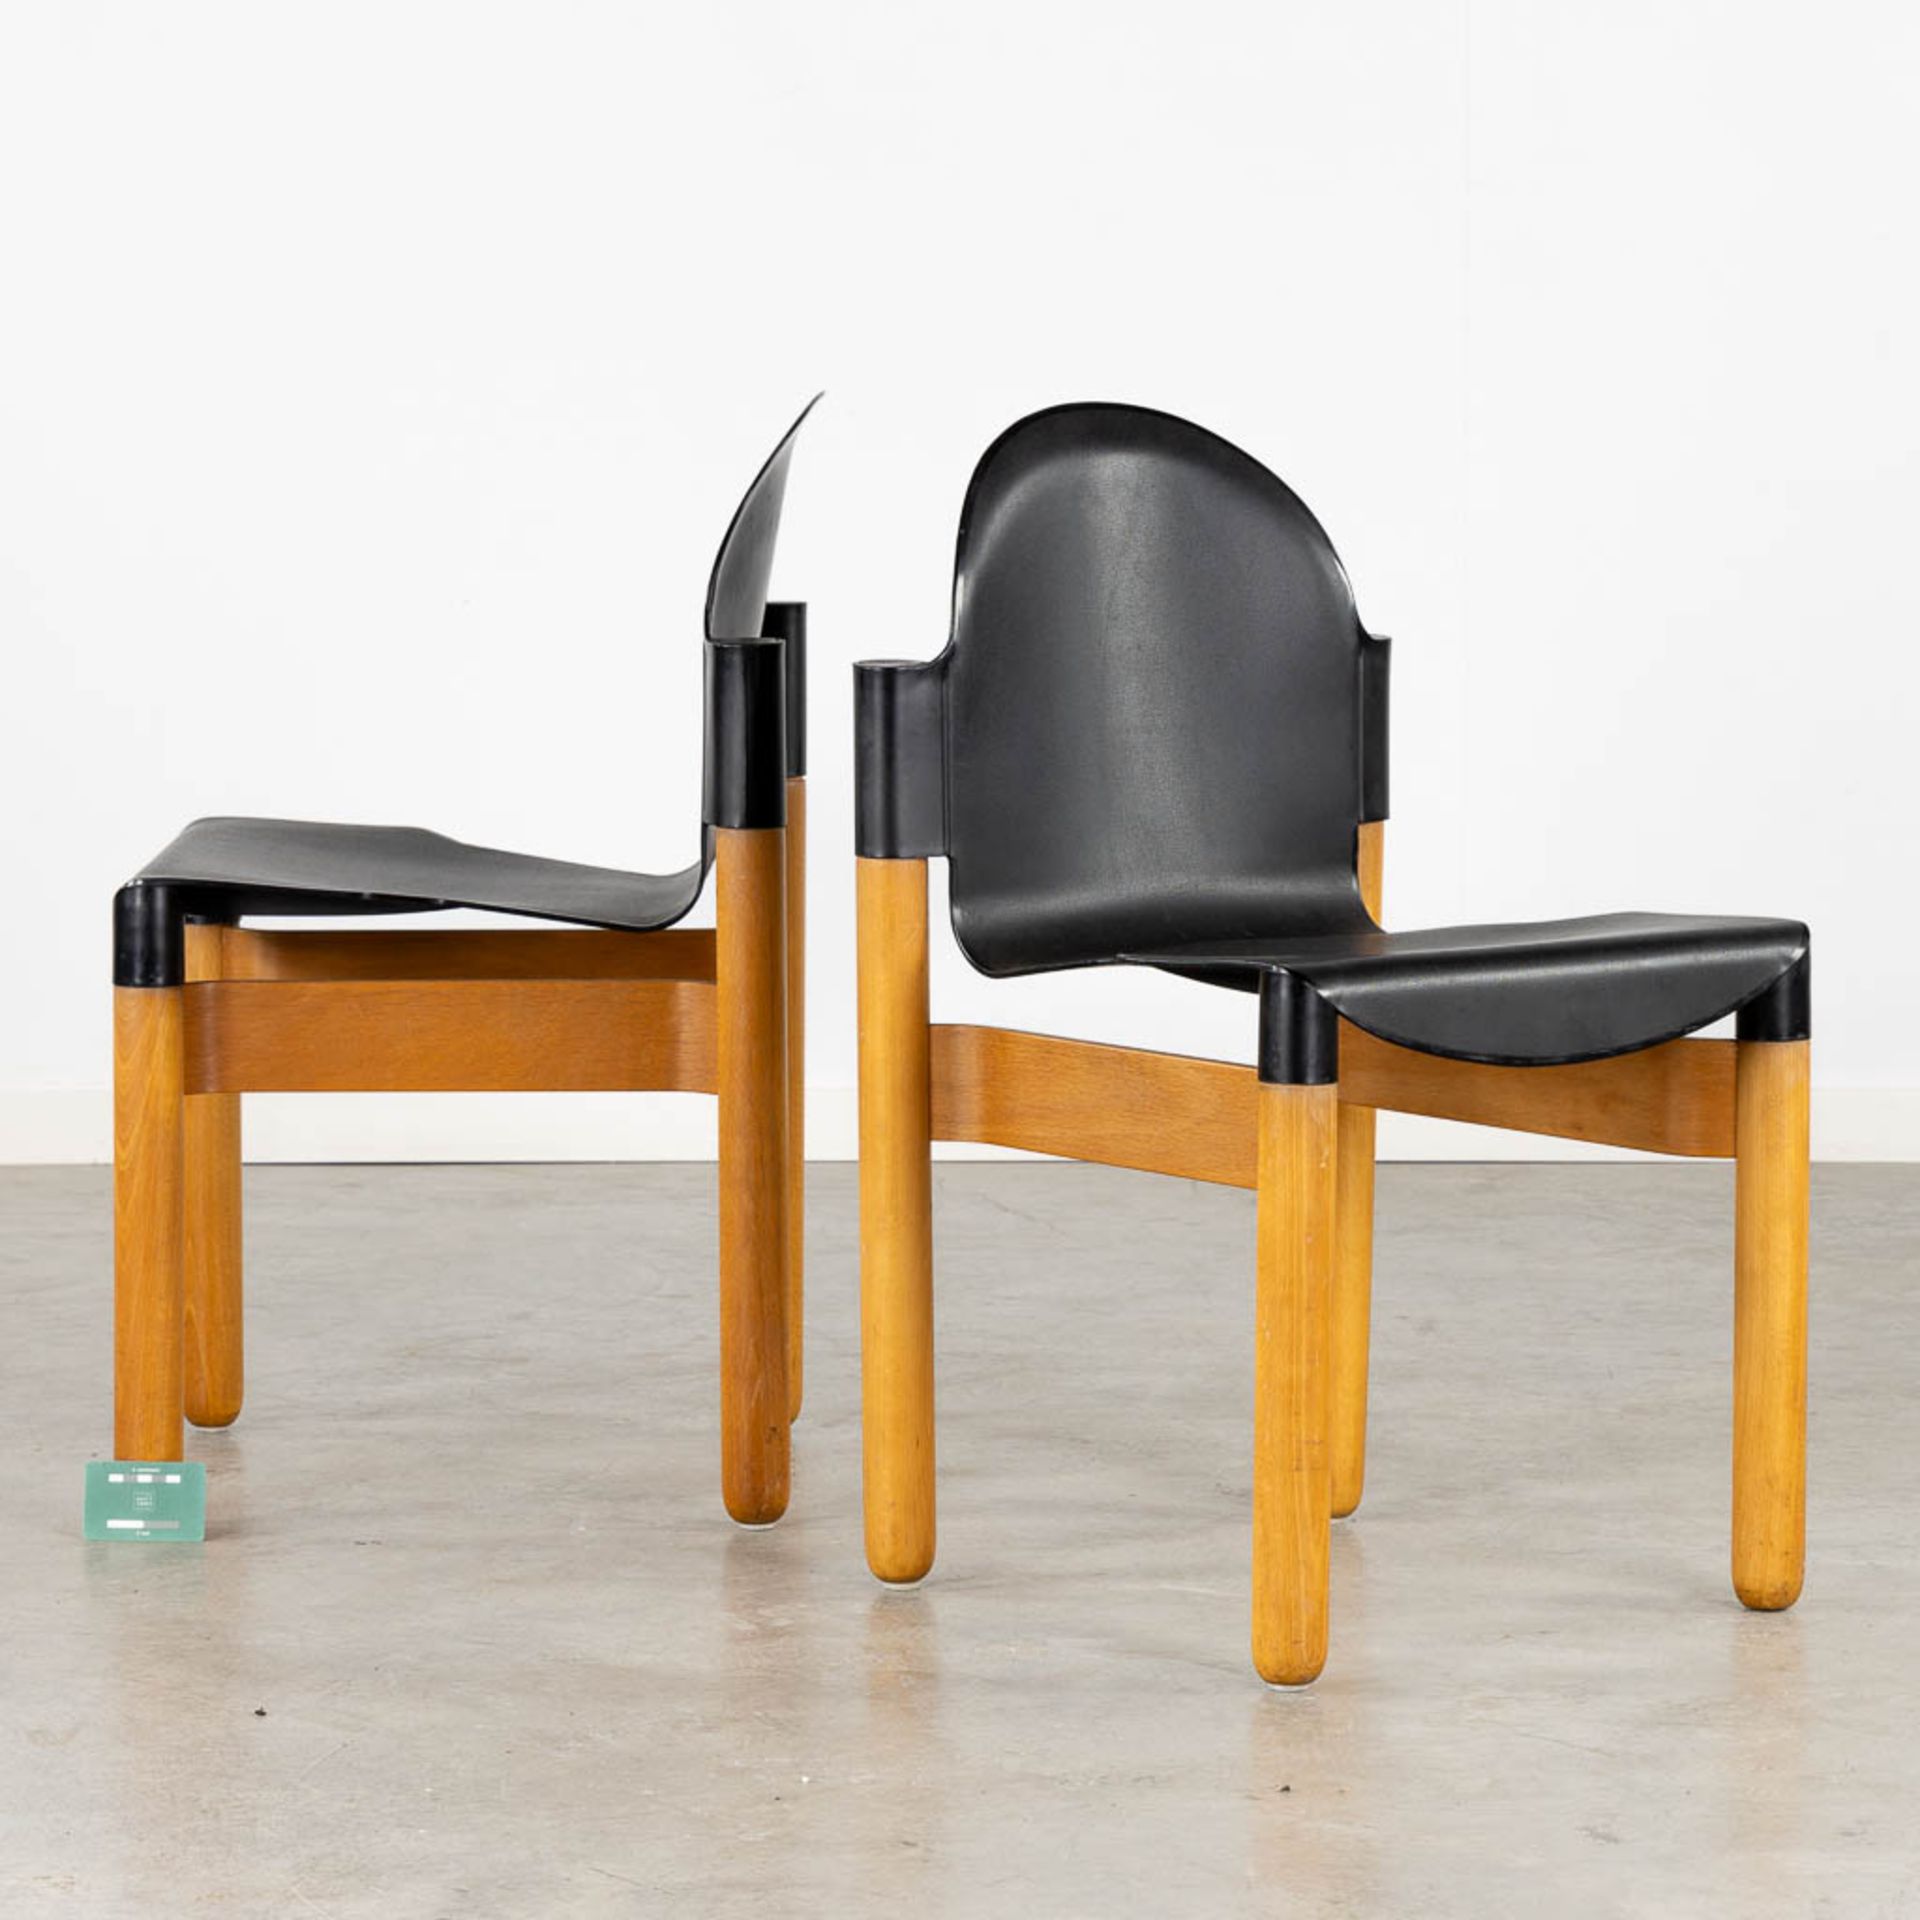 Gerd LANGE (1931) 'Chairs' for Thonet. Plastic and wood. (L:47 x W:46 x H:80 cm) - Image 2 of 13